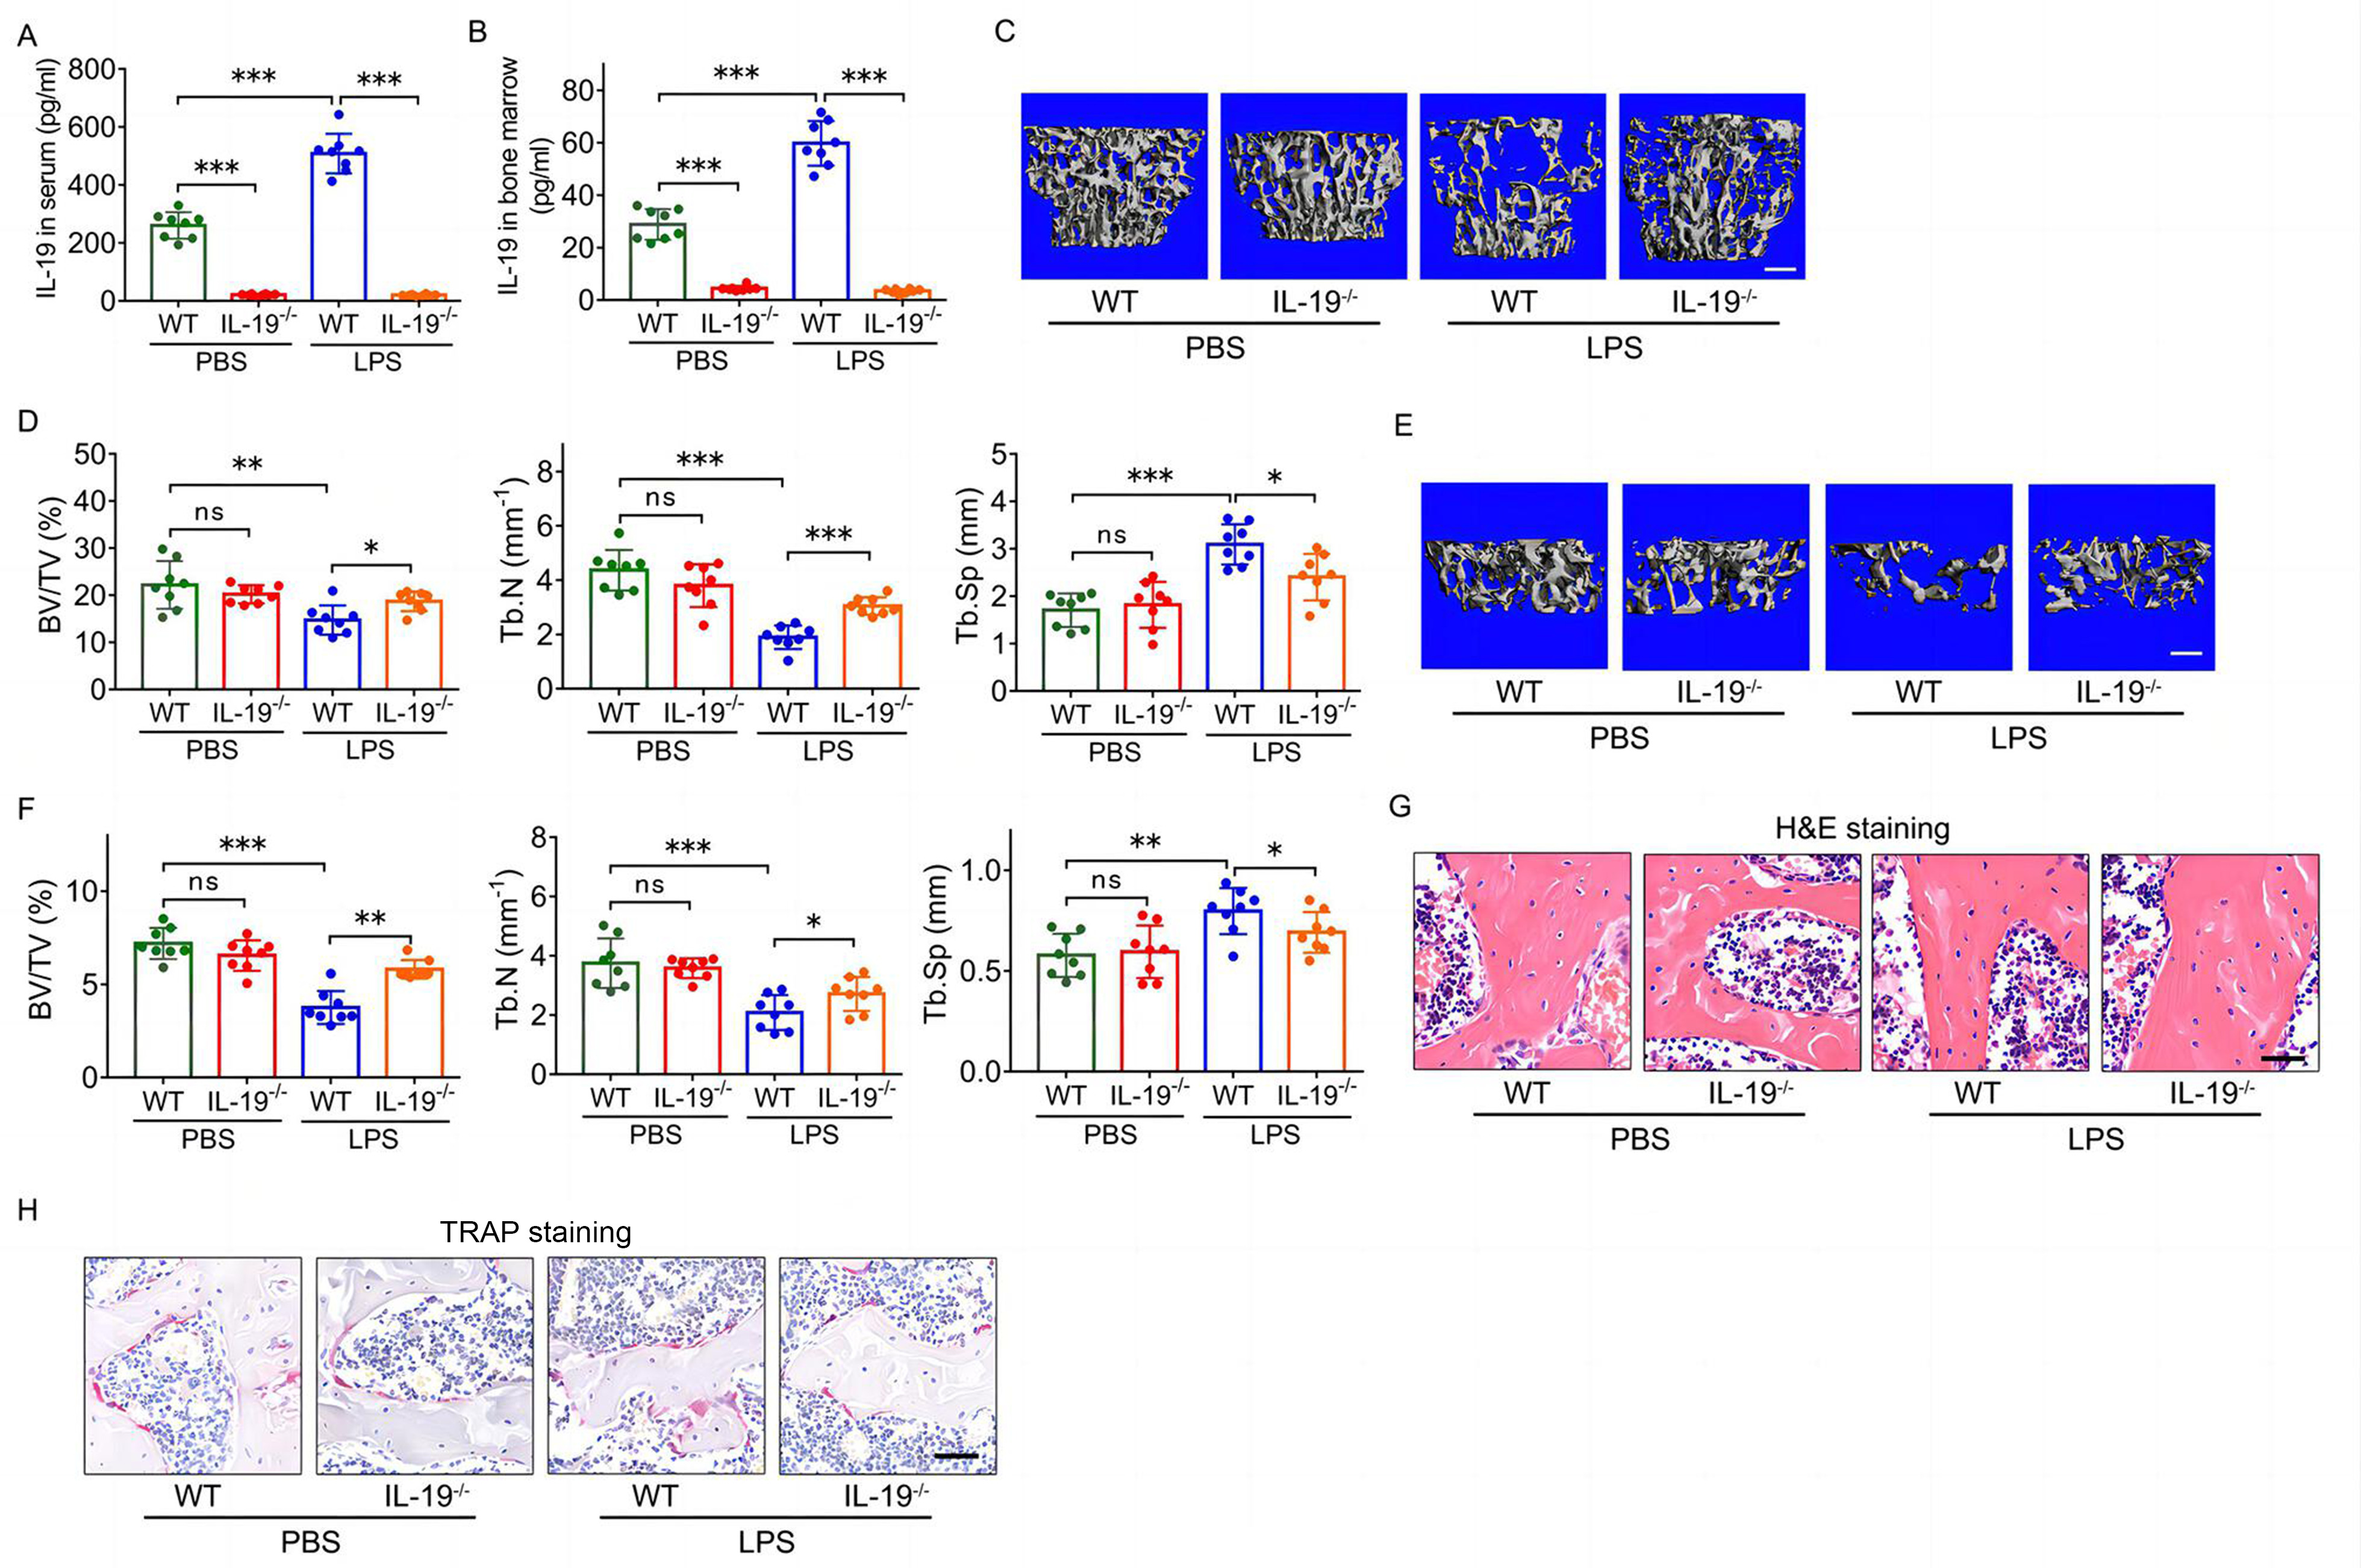 Fig. 3 
            Global deletion of interleukin (IL)-19 counteracts lipopolysaccharide (LPS)-induced trabecular bone loss and bone resorption improvement in mice. a) and b) IL-19 levels in a) peripheral blood serum and b) bone marrow aspirates in LPS-induced bone loss of IL-19-/- mice, determined by enzyme-linked immunosorbent assay (ELISA) (n = 8). c) Representative 3D reconstruction images of lumbar (L) #1 vertebrae trabecular bone in LPS-induced bone loss of IL-19-/- mice, determined by micro-CT. Scale bar: 400 μm. d) Bone volume fraction (BV/TV), trabecular number (Tb.N), and trabecular separation (Tb.Sp) of L1 vertebrae in LPS-induced bone loss of mice (n = 8). e) Representative 3D reconstruction images of distal femur trabecular bone in LPS-induced bone loss of IL-19-/- mice, determined by micro-CT. Scale bar = 400 μm. f) BV/TV, Tb.N, and Tb.Sp of distal femur in LPS-induced bone loss of IL-19-/- mice (n = 8). g) Haematoxylin and eosin (H&E) staining of femur trabecular bone in LPS-induced bone loss of mice (n = 8). Scale bar: 40 μm. h) Tartrate-resistant acid phosphatase (TRAP) staining of femur bone in LPS-induced bone loss of mice (n = 8). Scale bar: 40 μm. Data are representative of three independent experiments, and shown as means and standard deviations. P-values were determined by one-way analysis of variance (ANOVA) followed by Tukey’s test (a, b, d, f). *p < 0.05, **p < 0.01, ***p < 0.001. ns, no significance; PBS, phosphate-buffered saline; WT, wild-type.
          